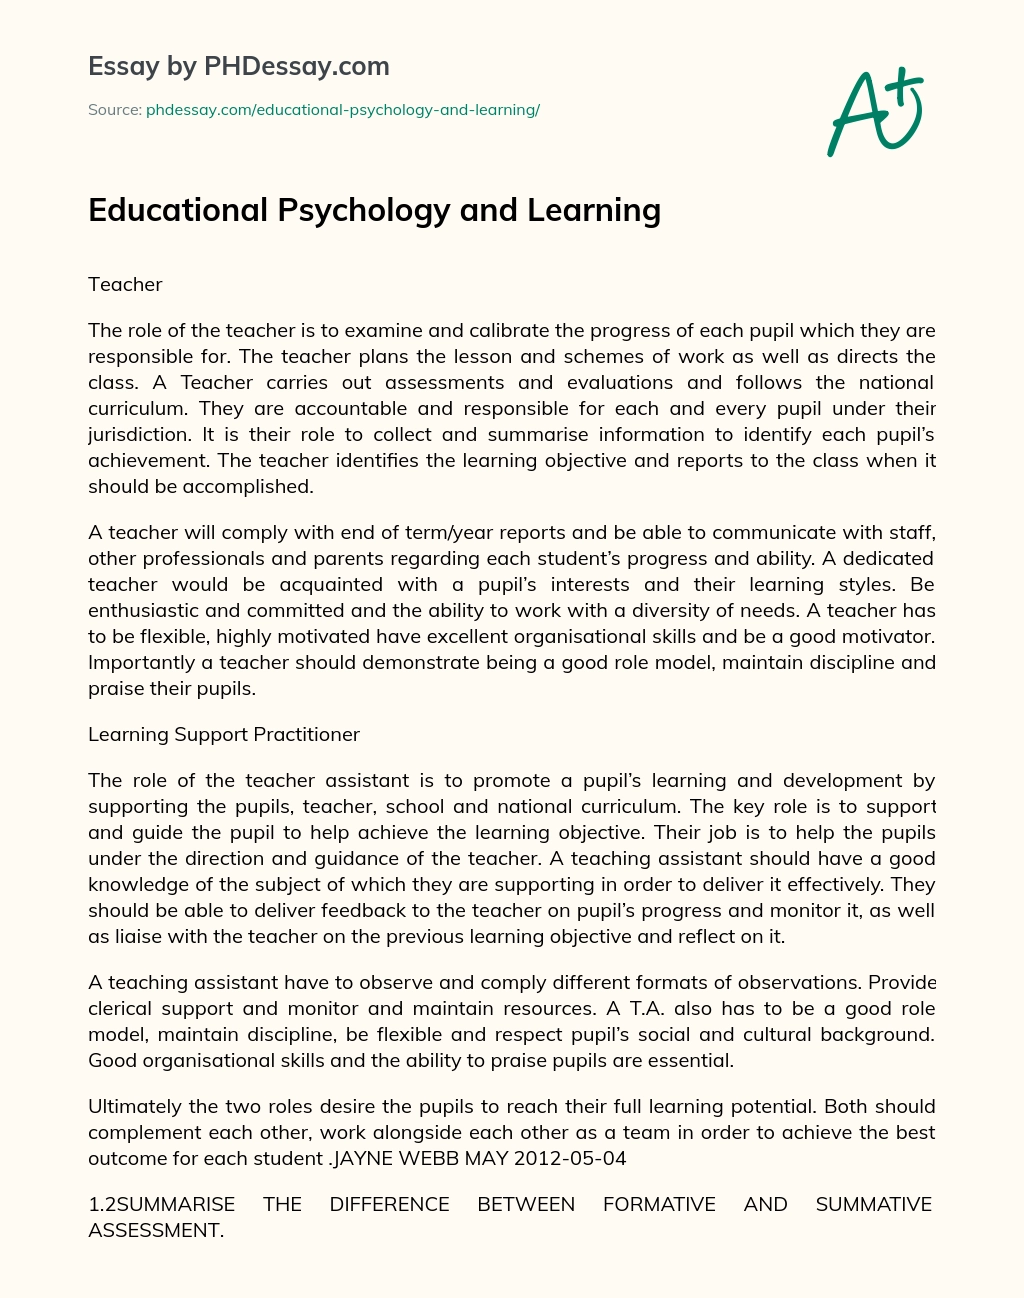 Educational Psychology and Learning essay